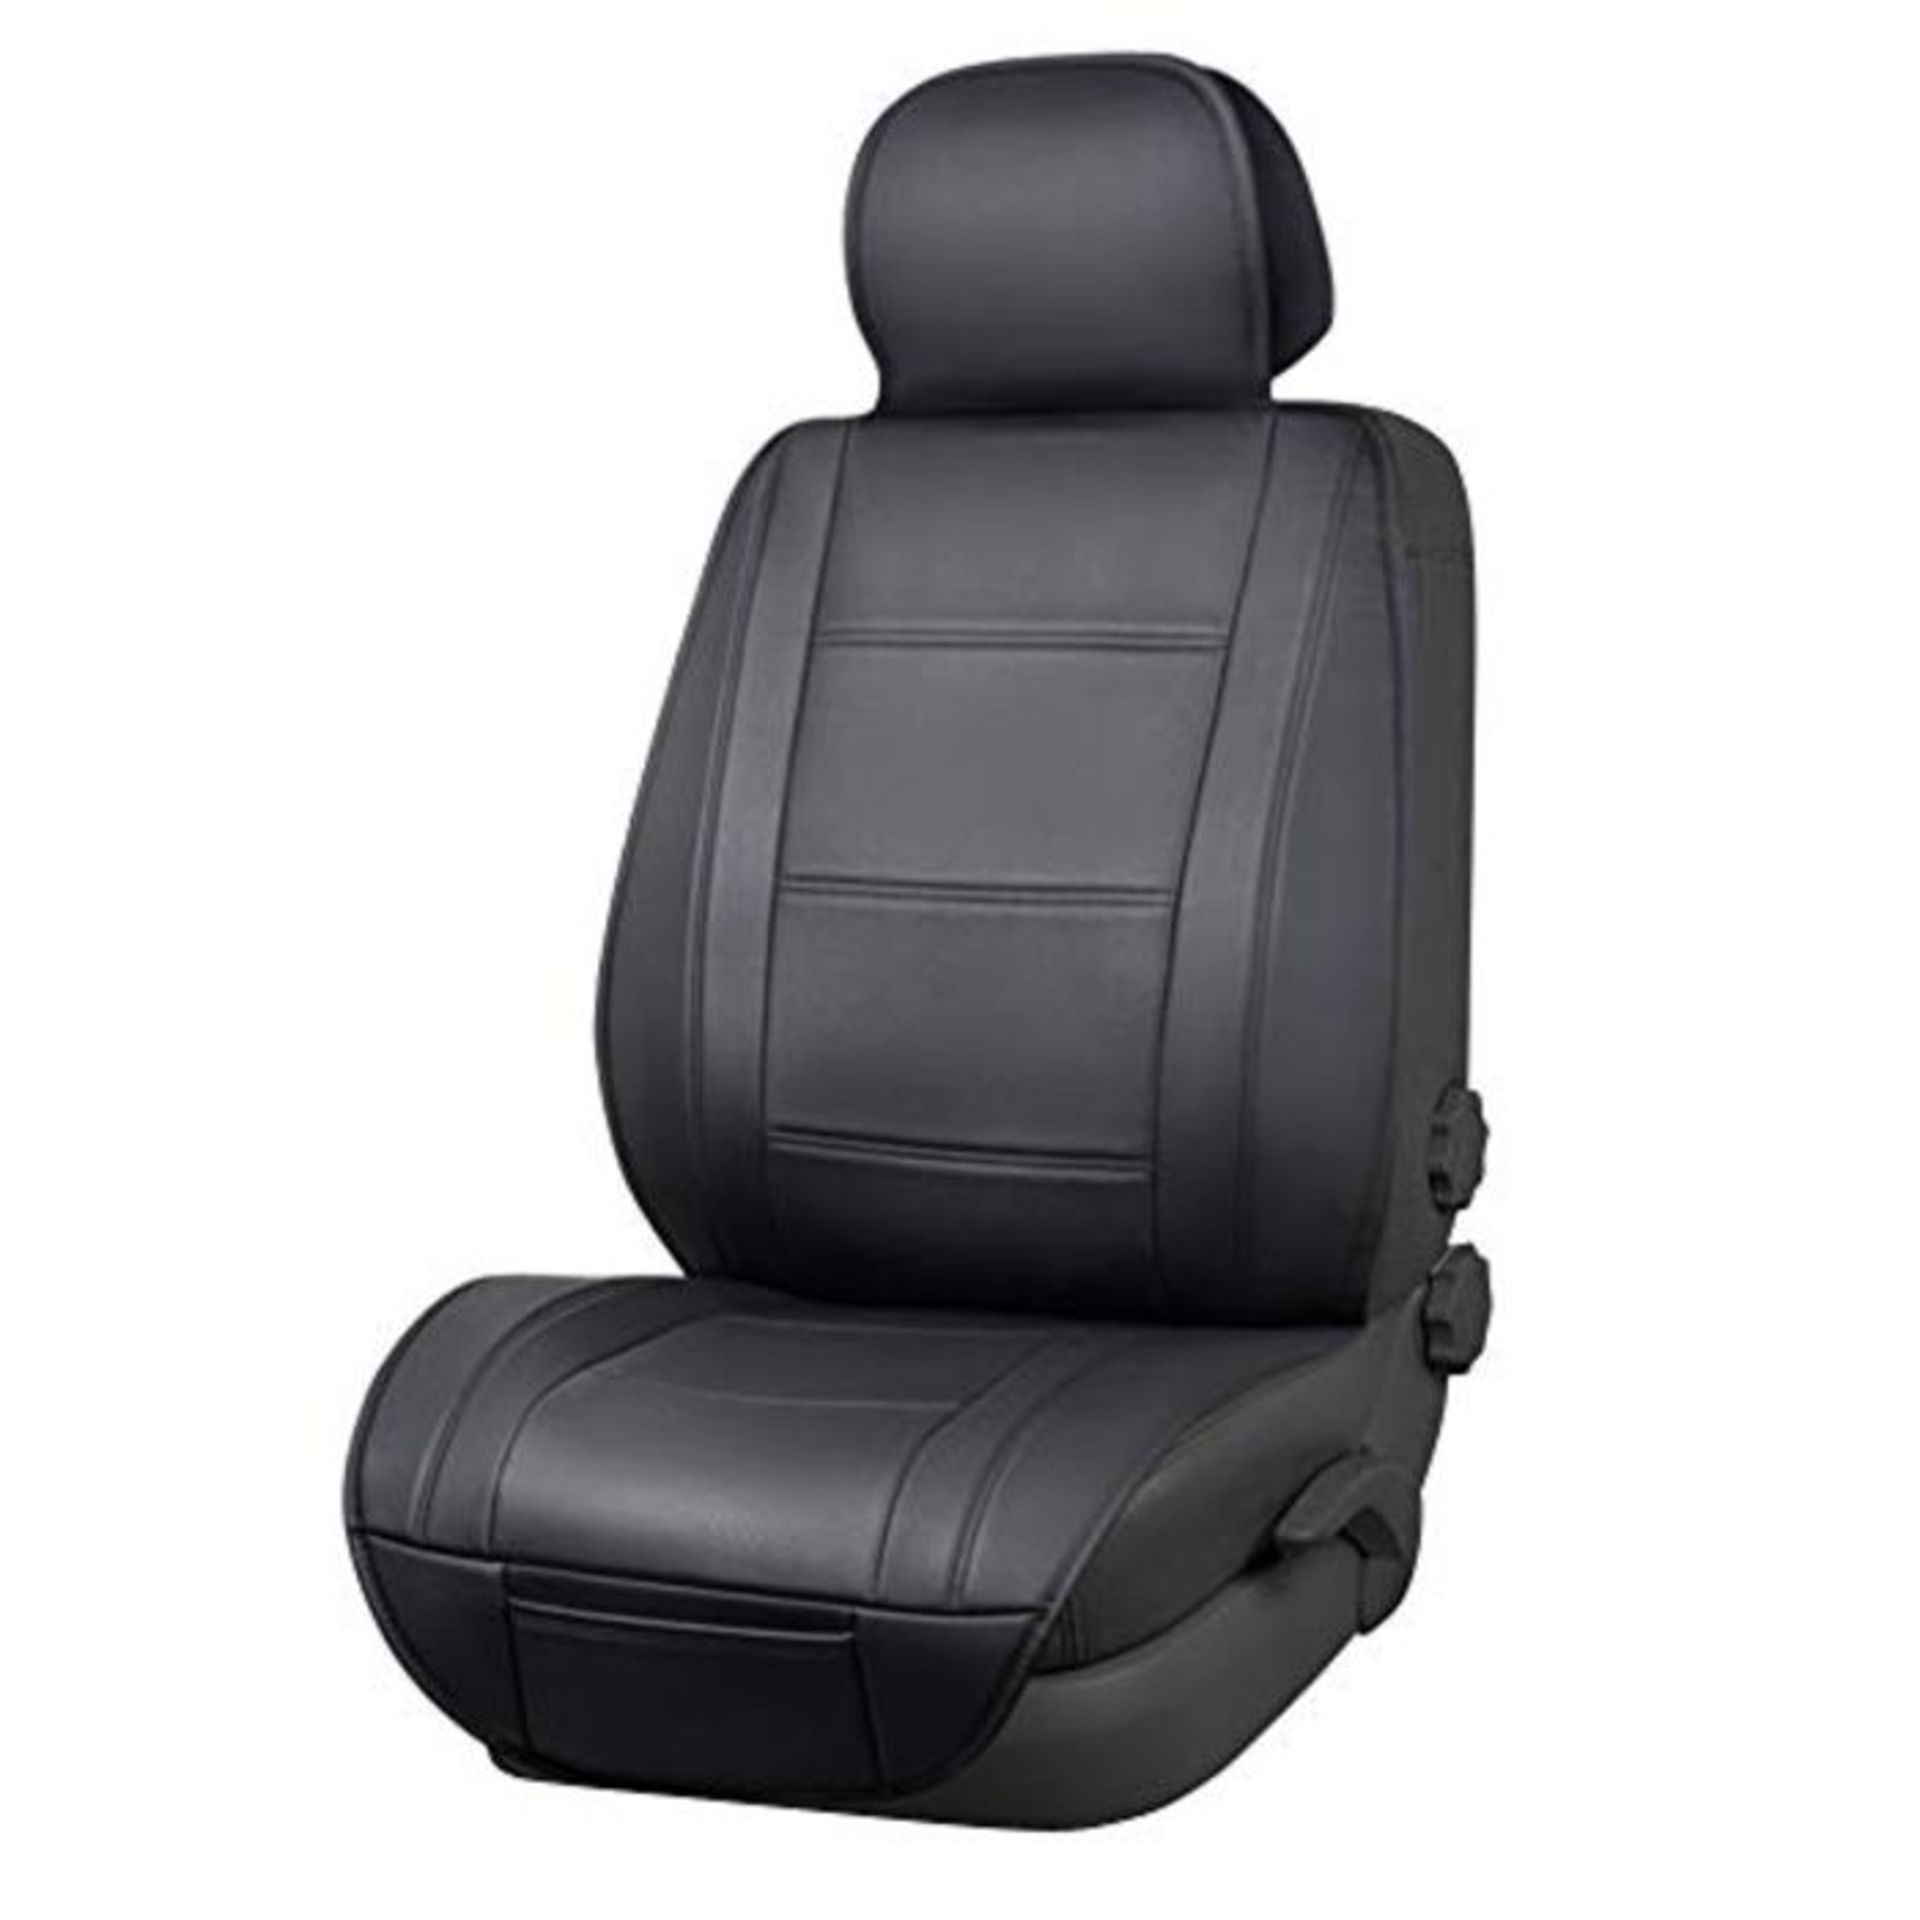 Amazon Basics Deluxe Sideless Universal Fit Leatherette Seat Cover, Black